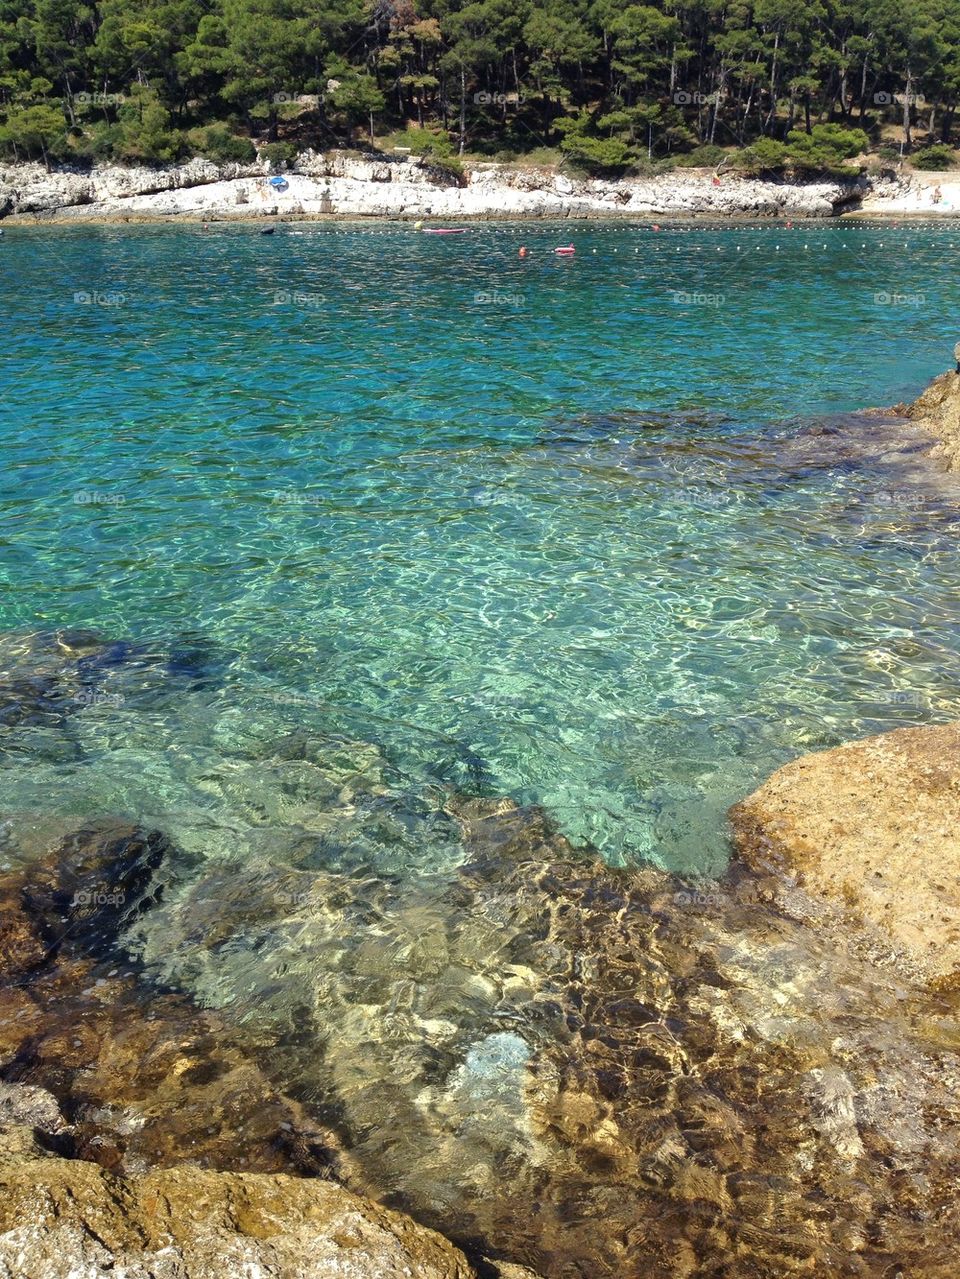 Clear water!